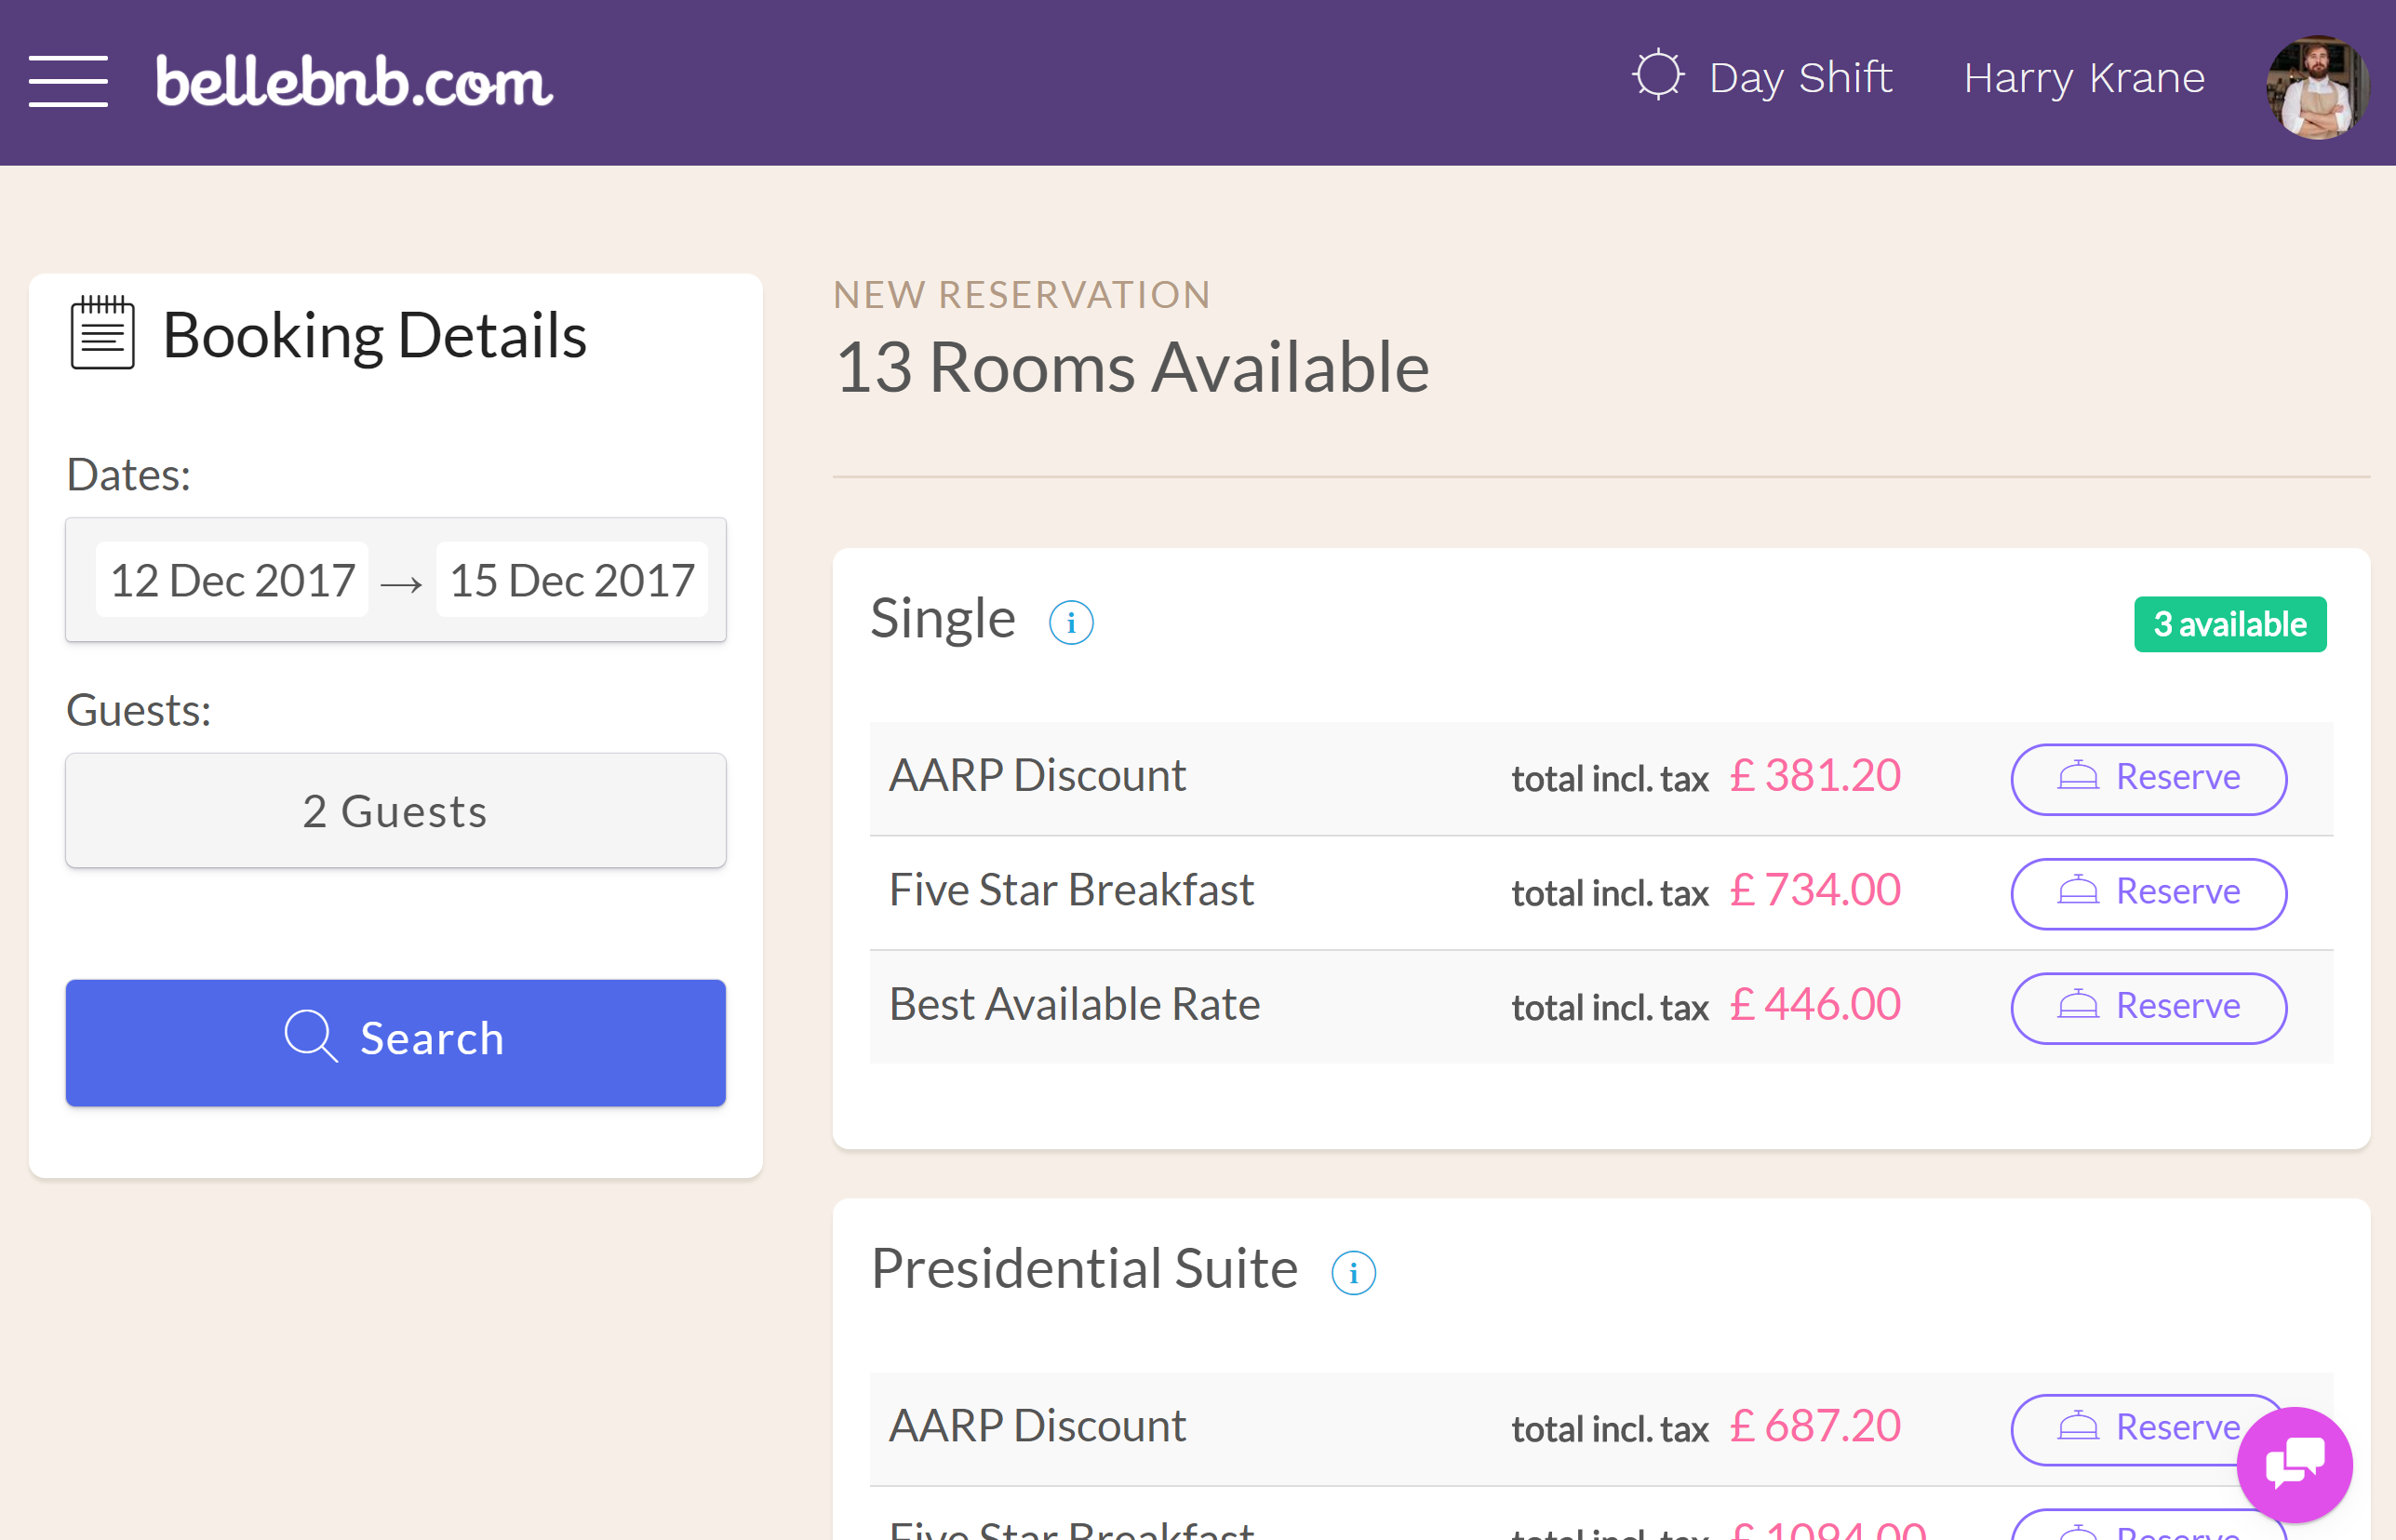 This method is very convenient because you can book an exact room, and you don’t have to leave your calendar. The drawback is you only see the price for the selected room. Sometimes a guest will call in and expect several options to be offered